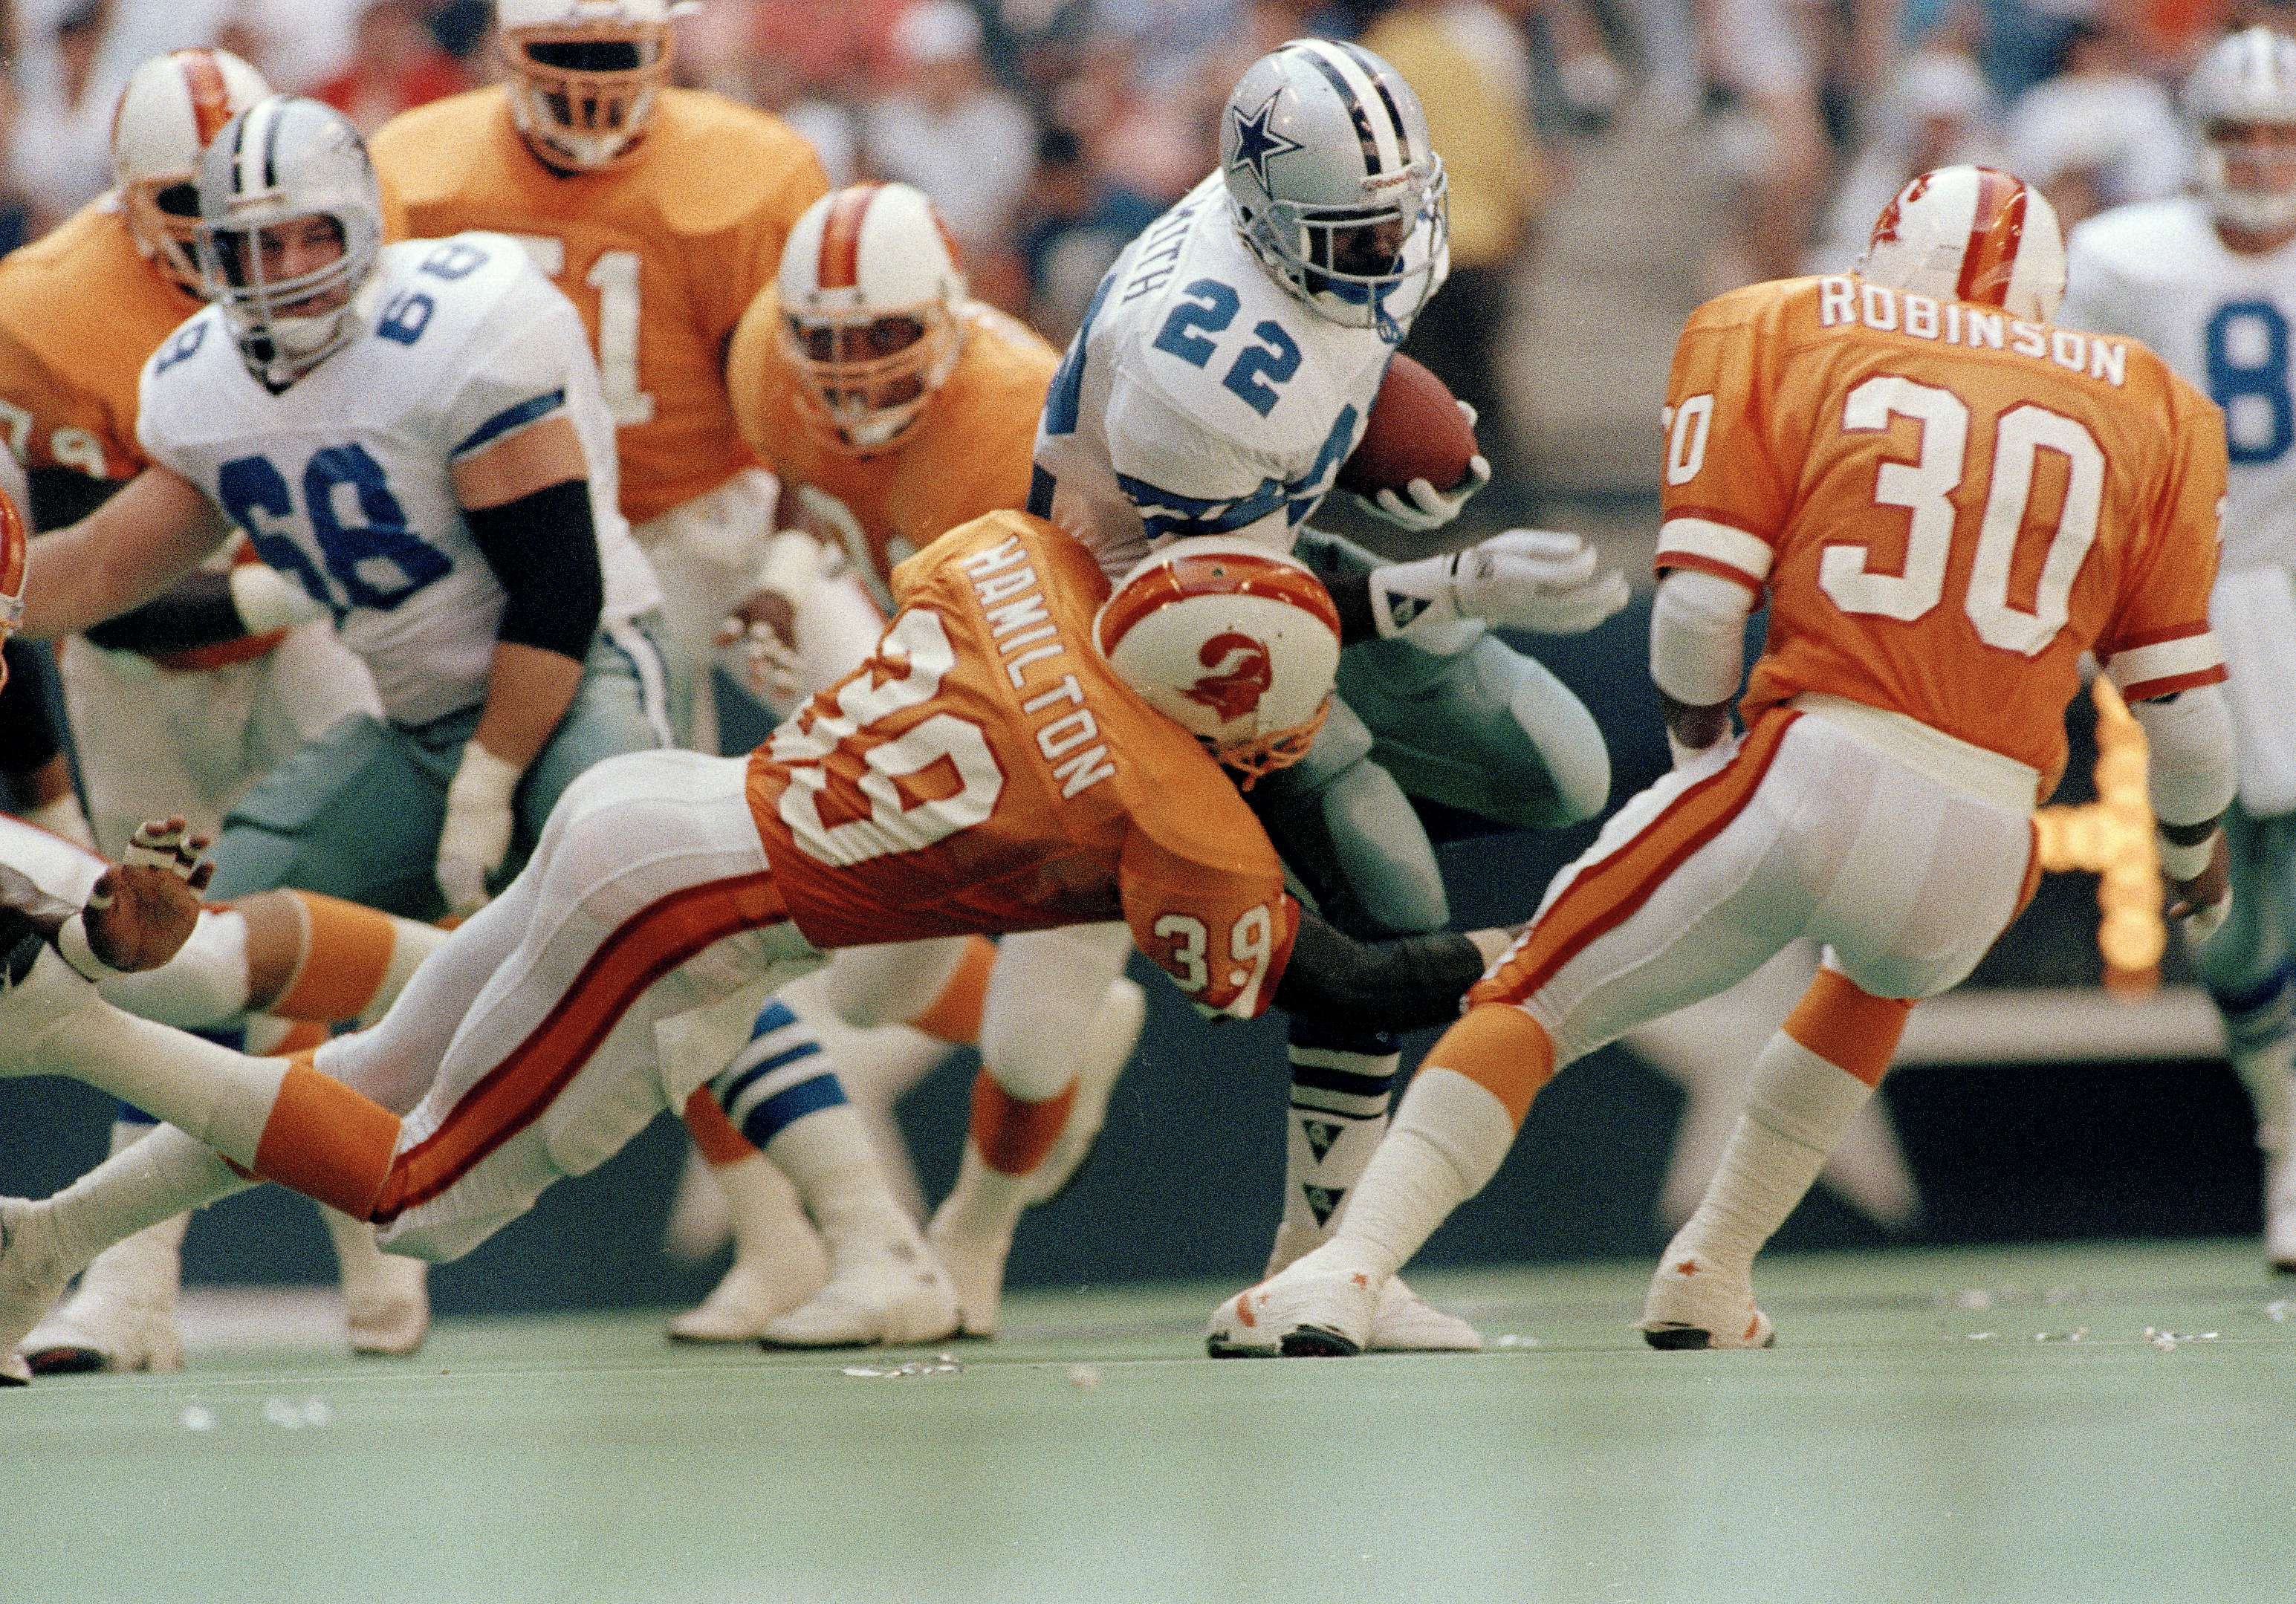 Our ranking of the top 100 Tampa Bay Buccaneers ever starts here.